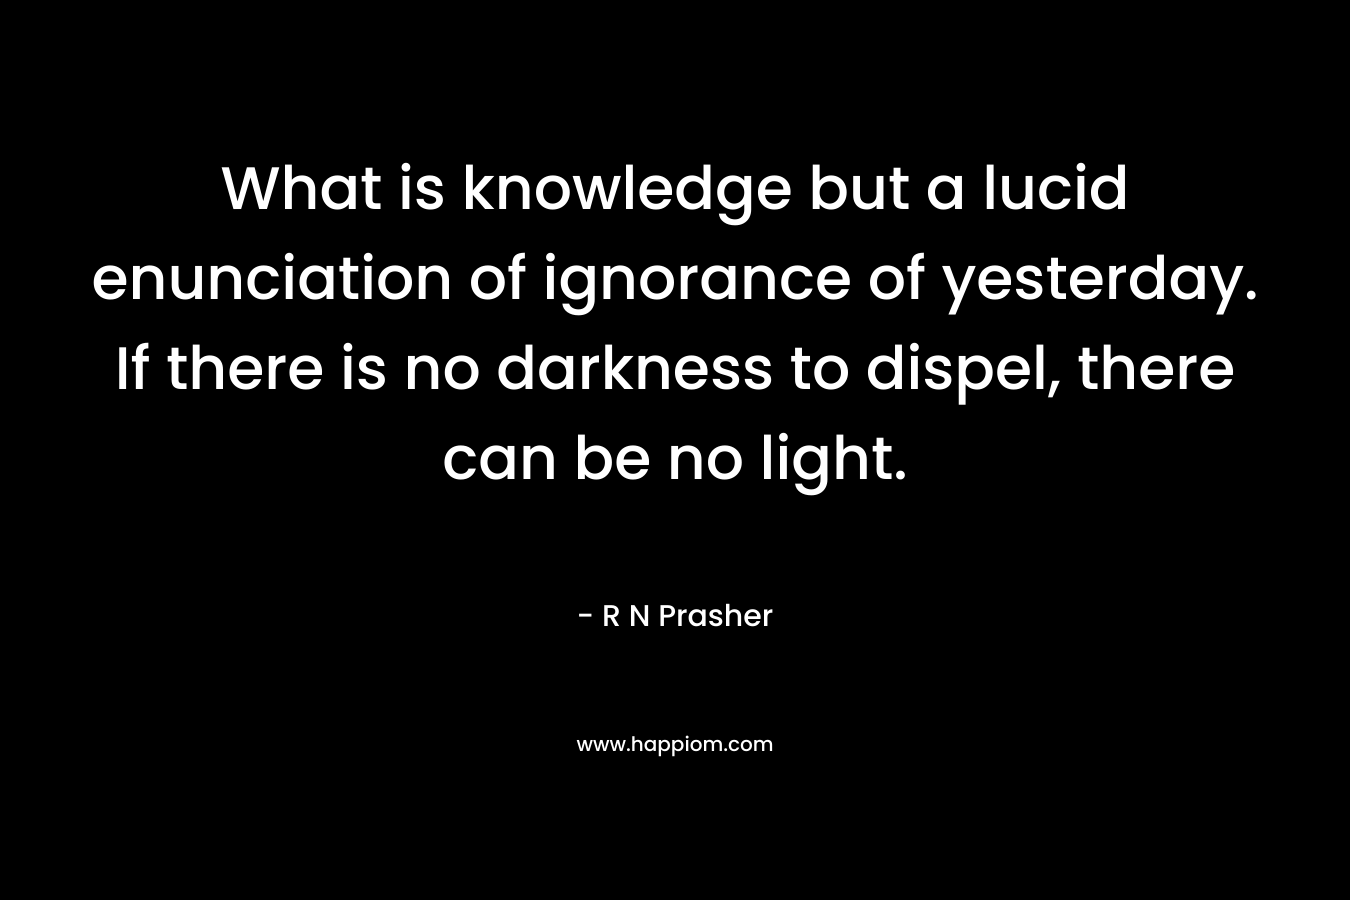 What is knowledge but a lucid enunciation of ignorance of yesterday. If there is no darkness to dispel, there can be no light. – R N Prasher